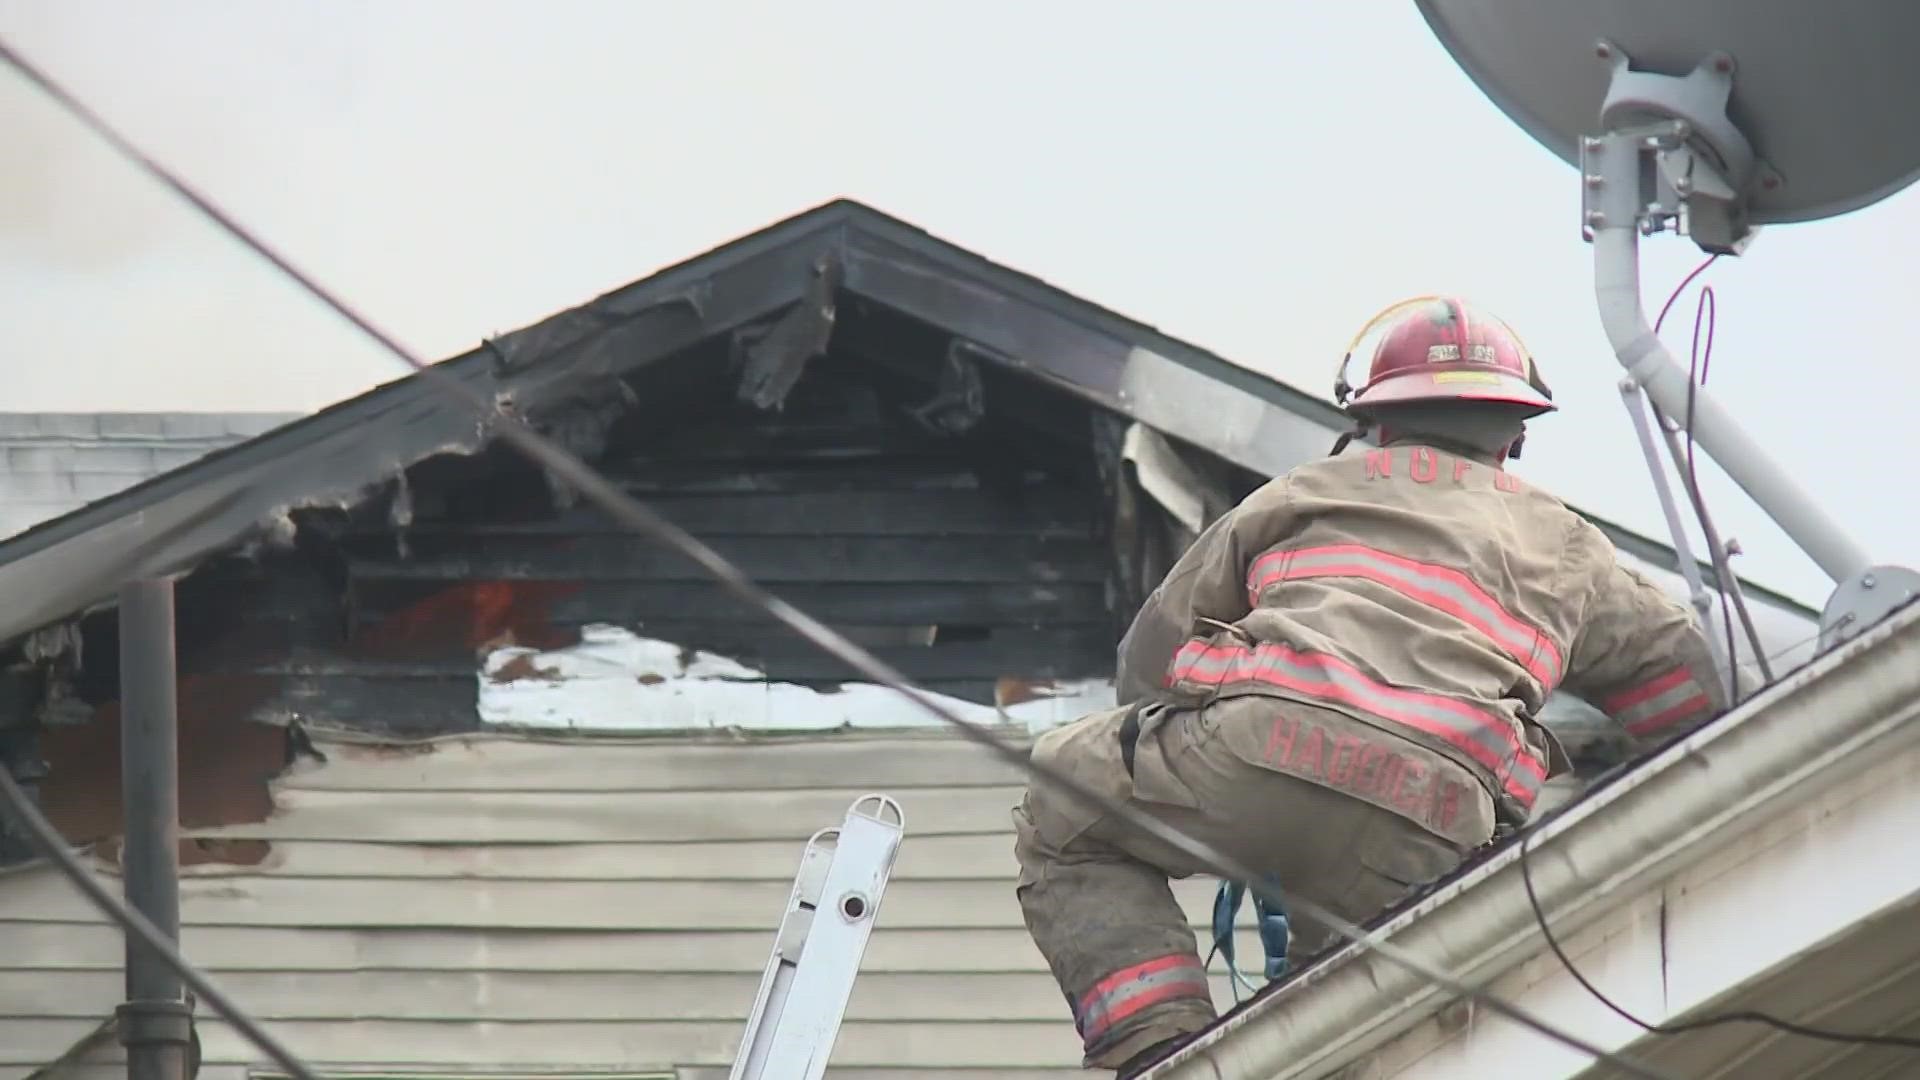 A fire in Central City Friday claimed the life of a man.